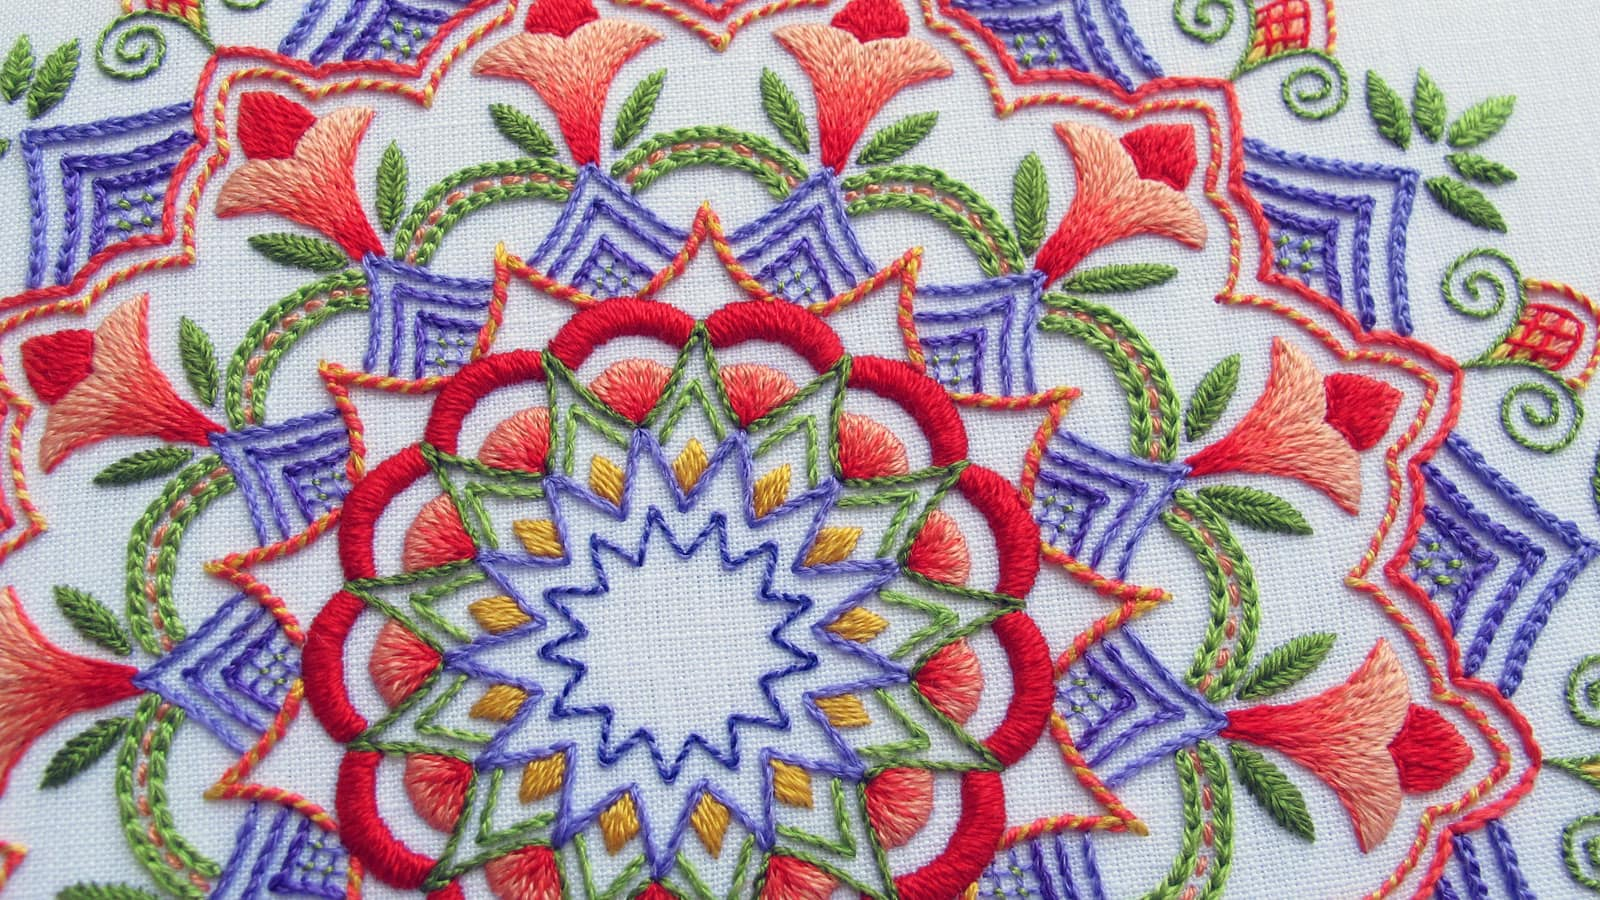 Make Your Own Embroidery Pattern Needlenthread Tips Tricks And Great Resources For Hand Embroidery